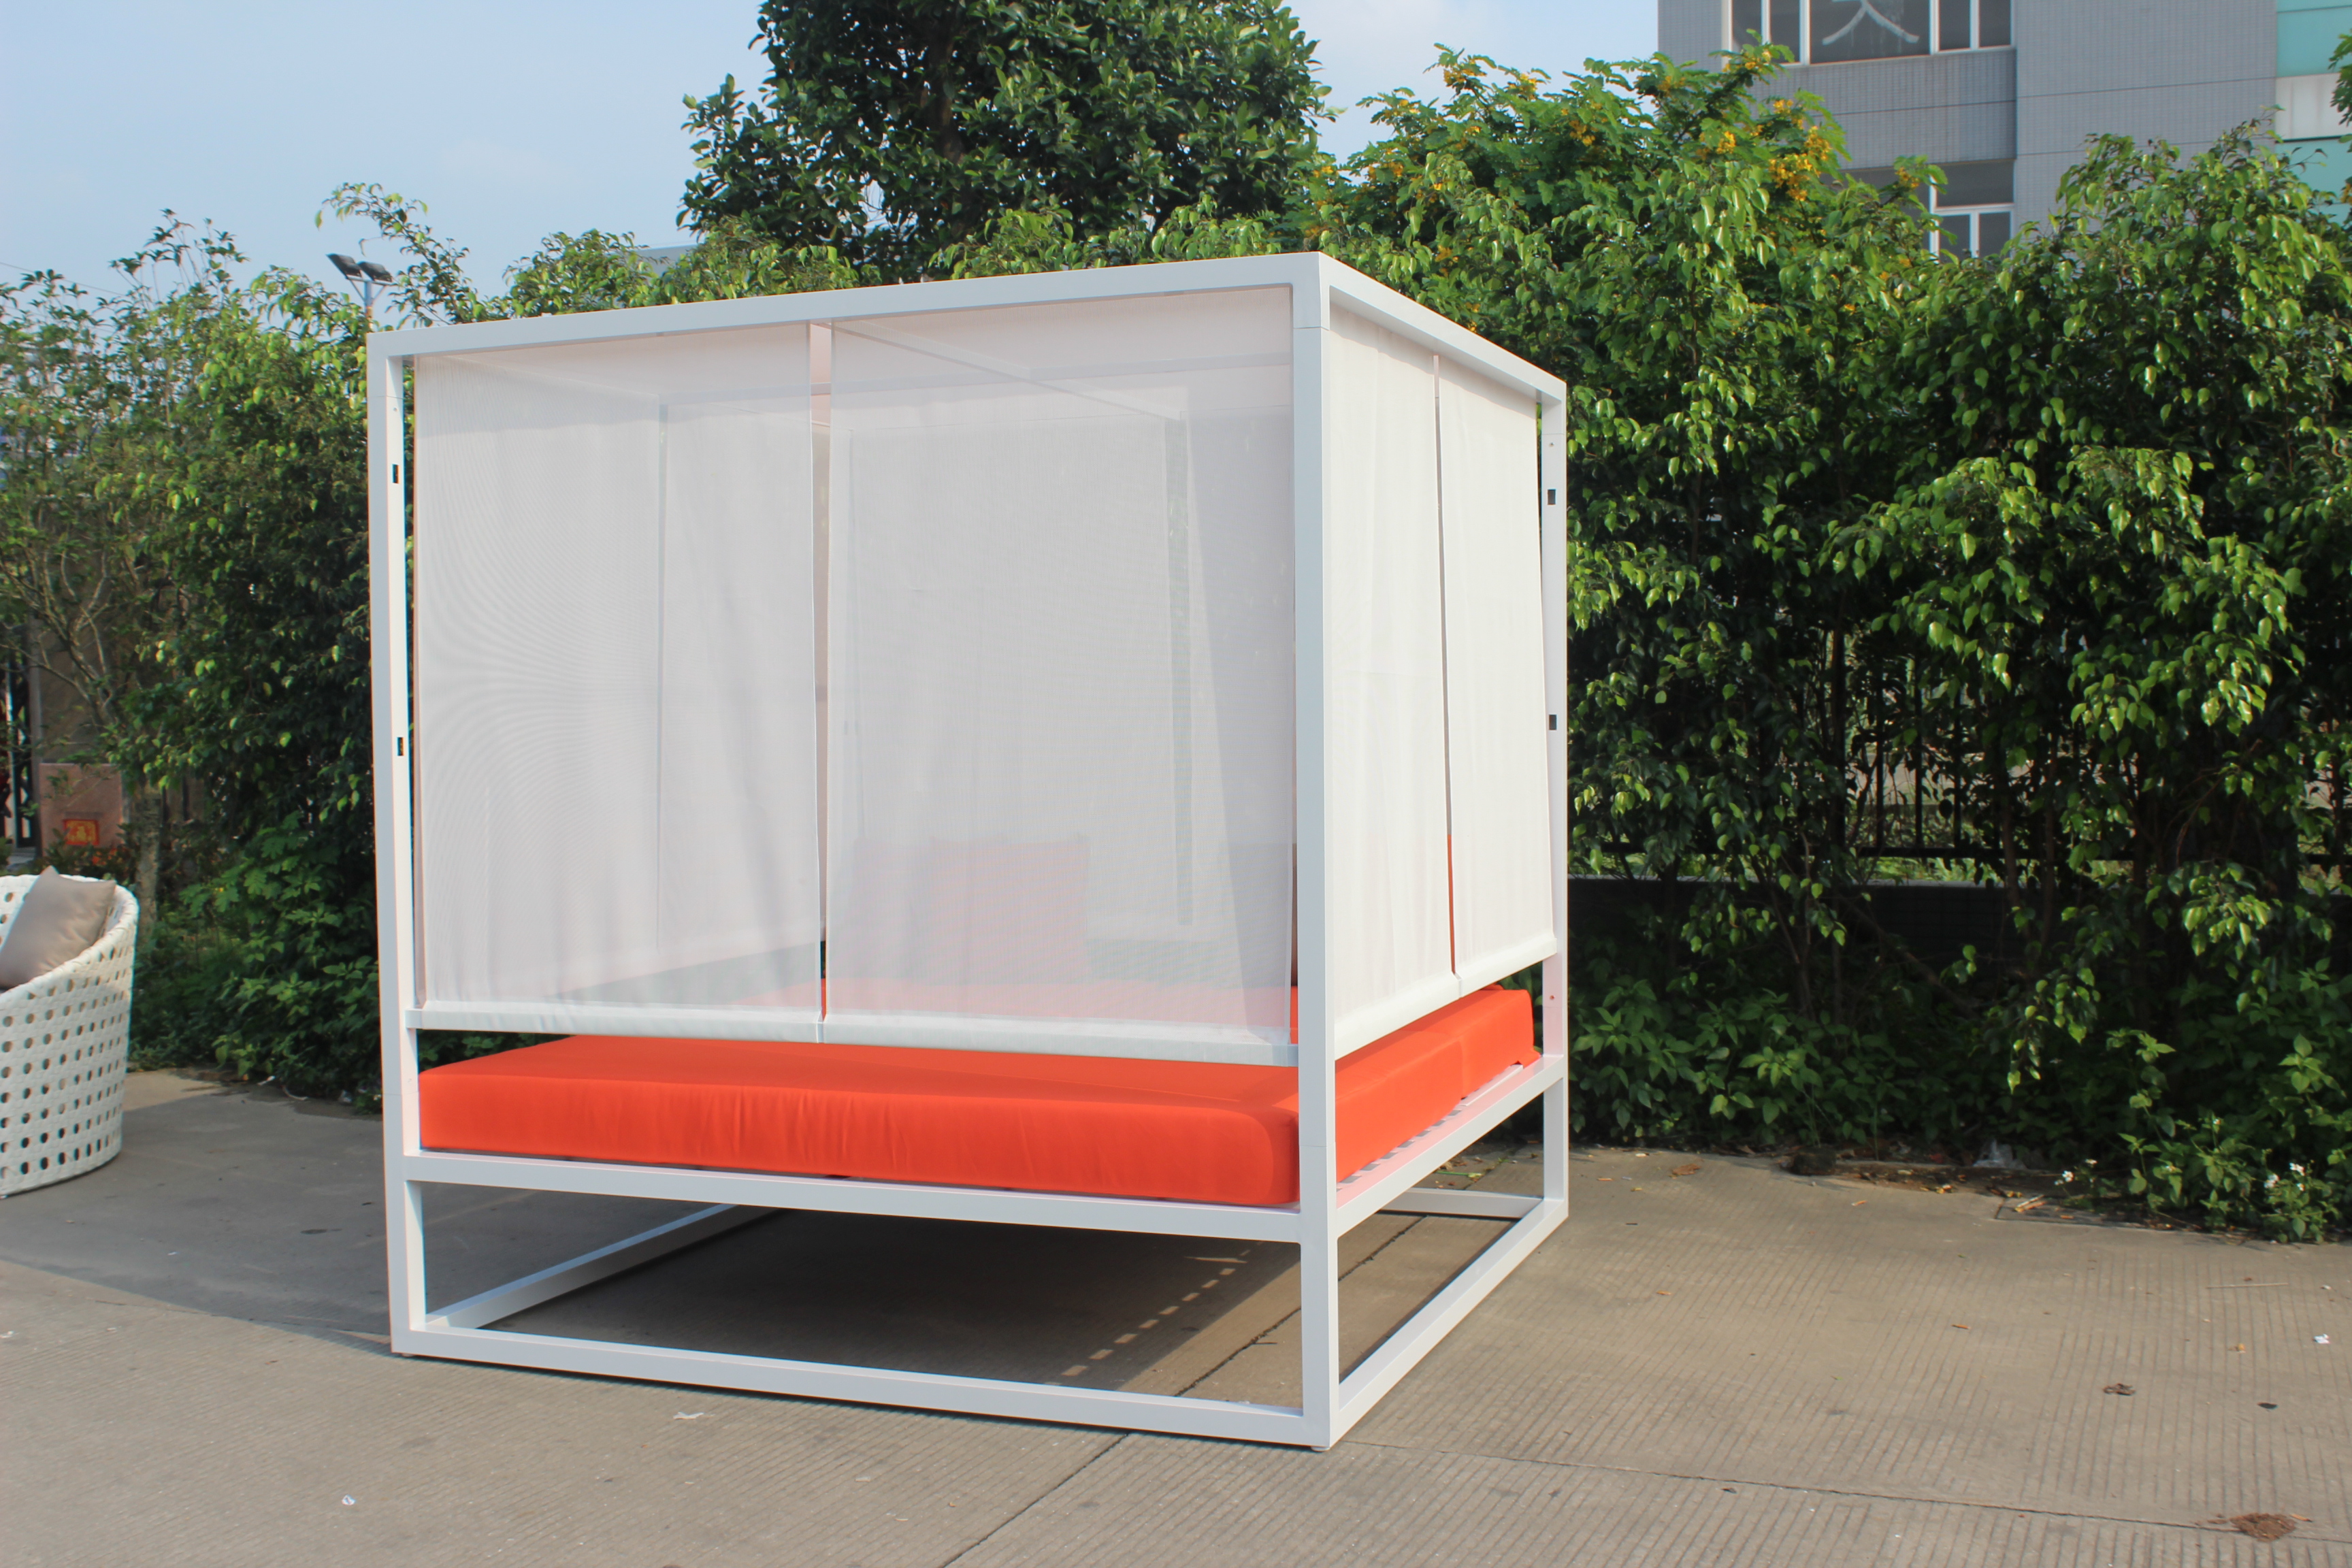 White aluminum outdoor daybed with canopy